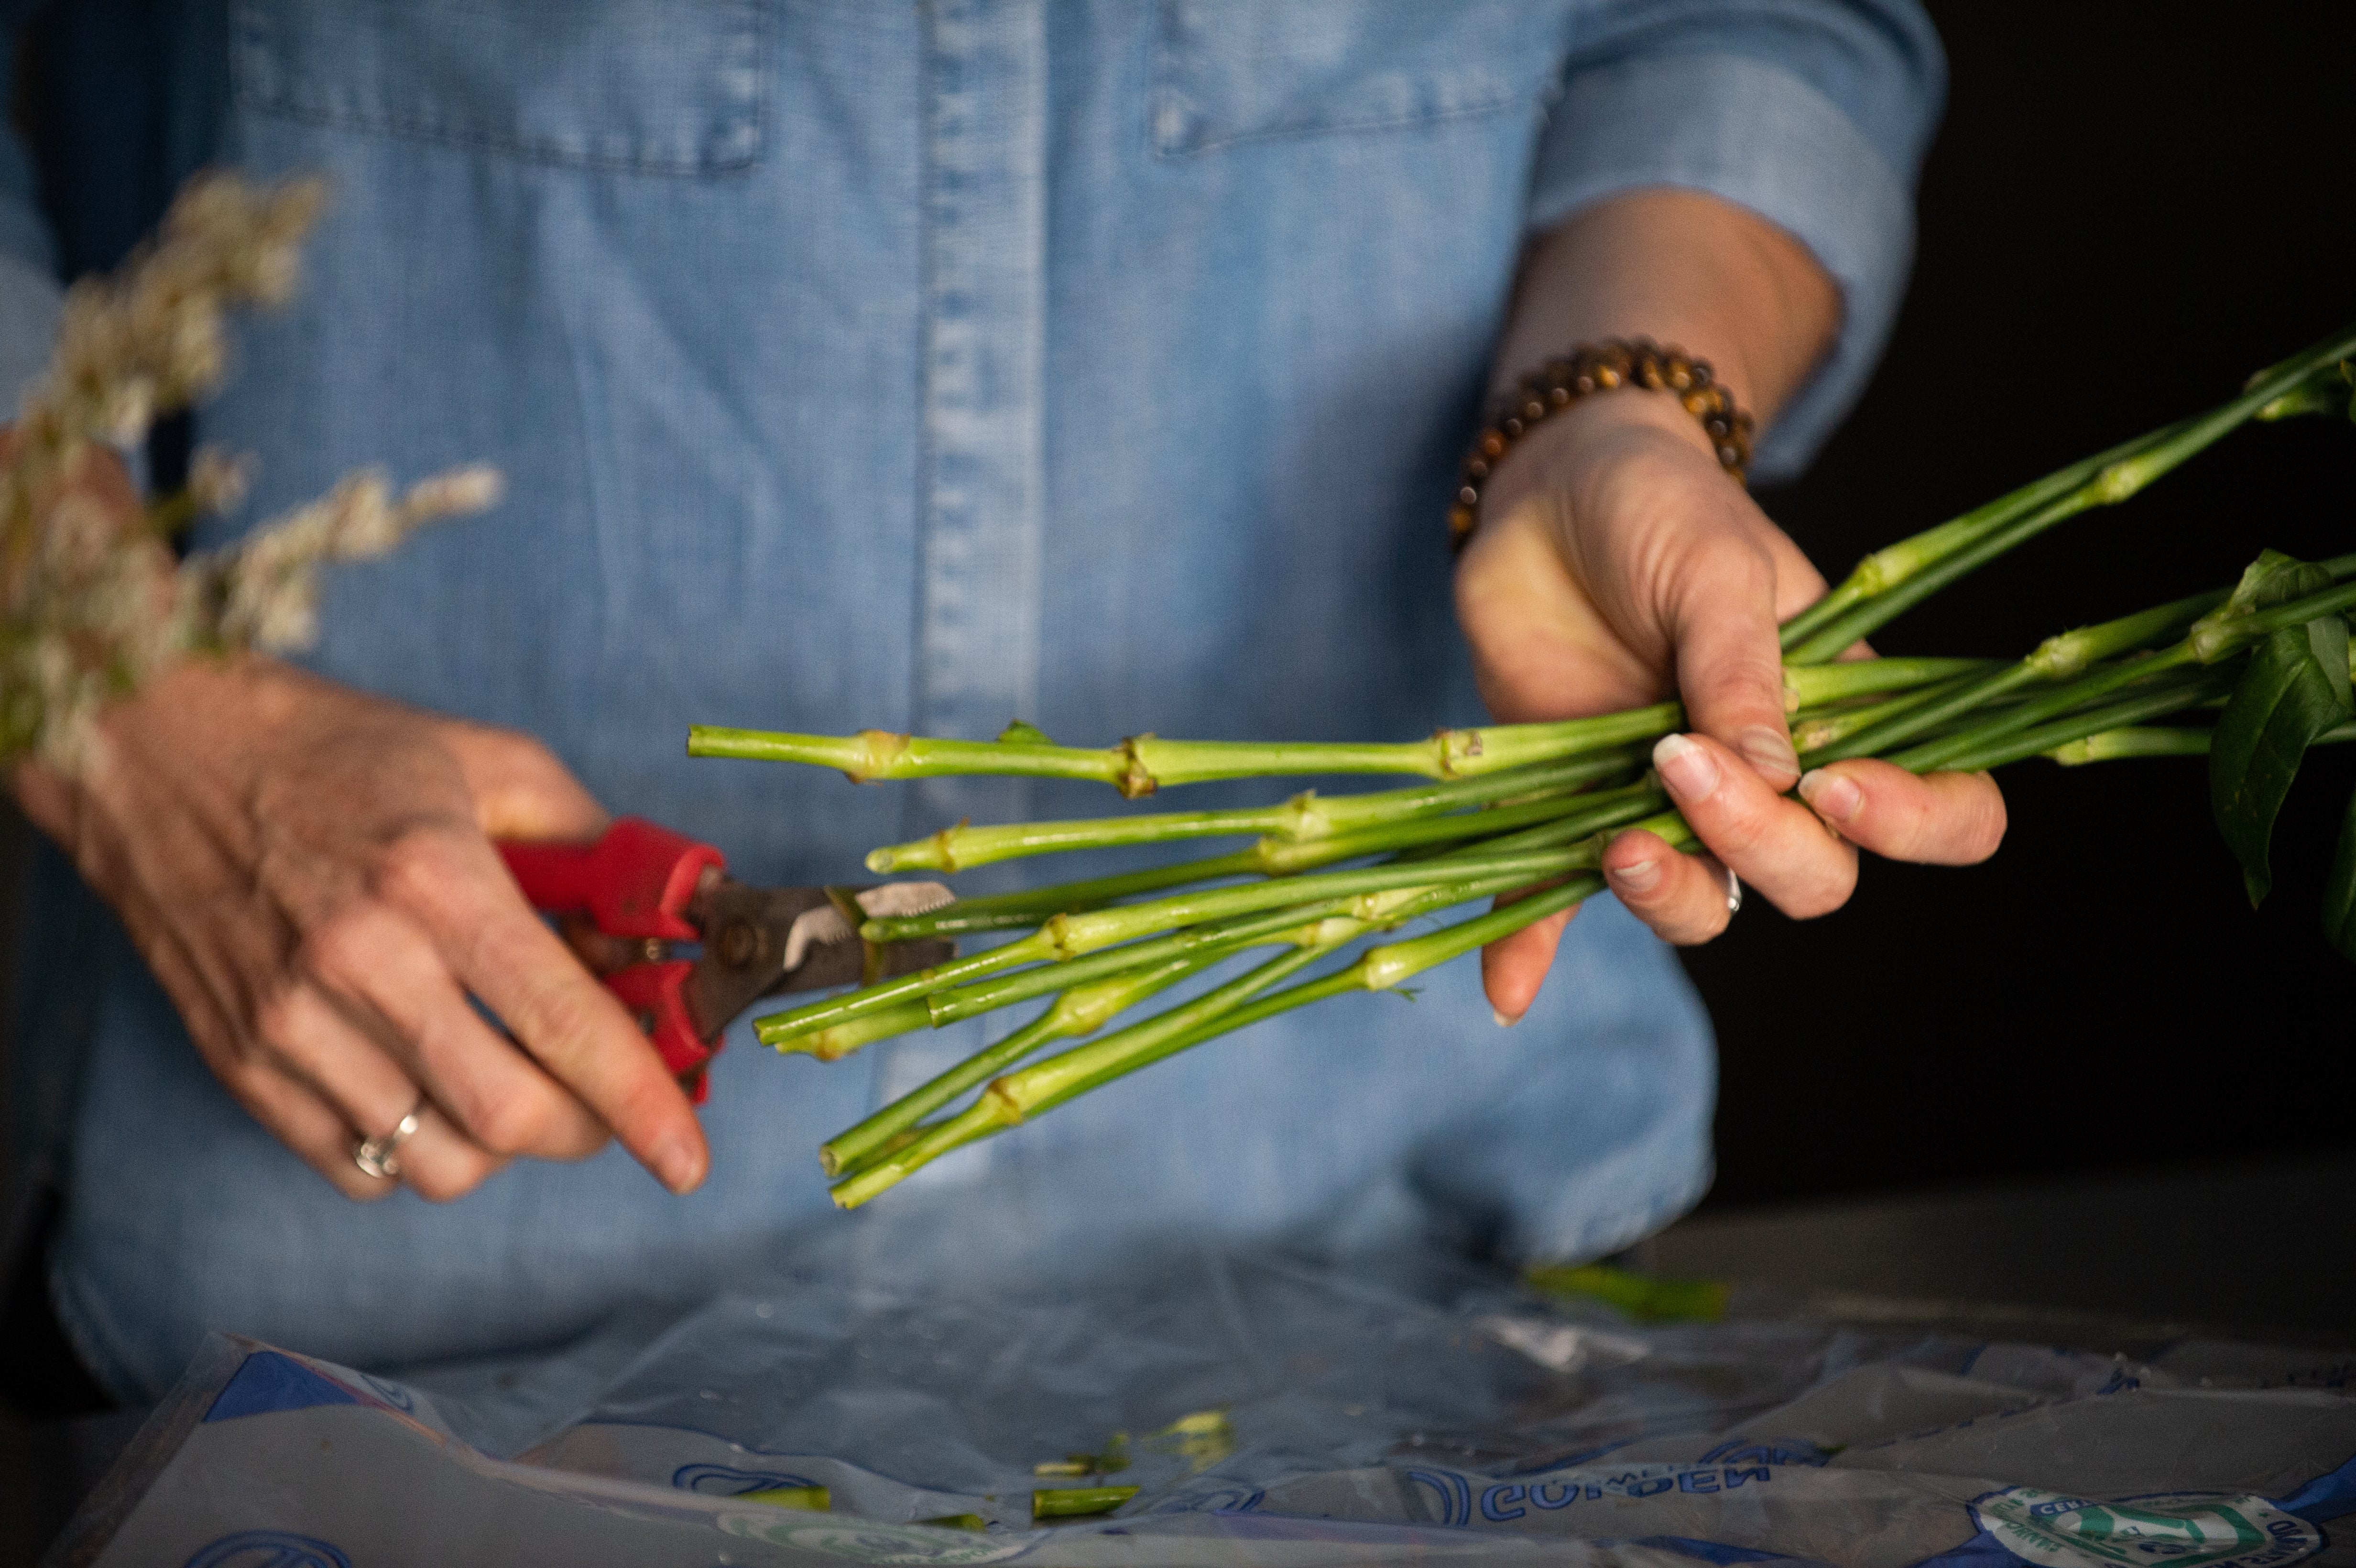 Floral Design Workshops where you can learn the art of floral design from our Lead Designer.